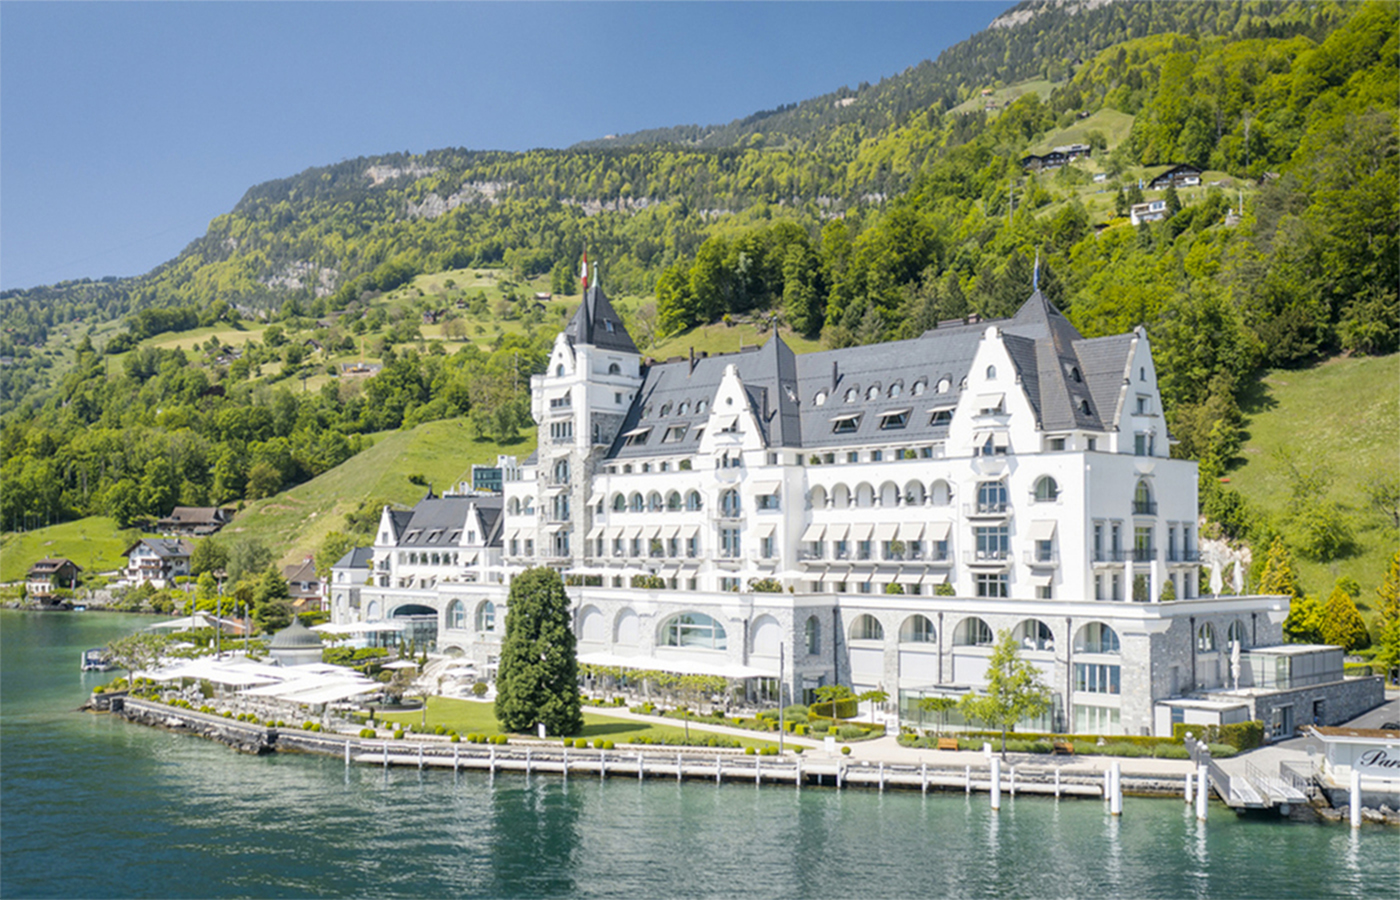 Overview of luxury wedding venue on Lake Lucerne